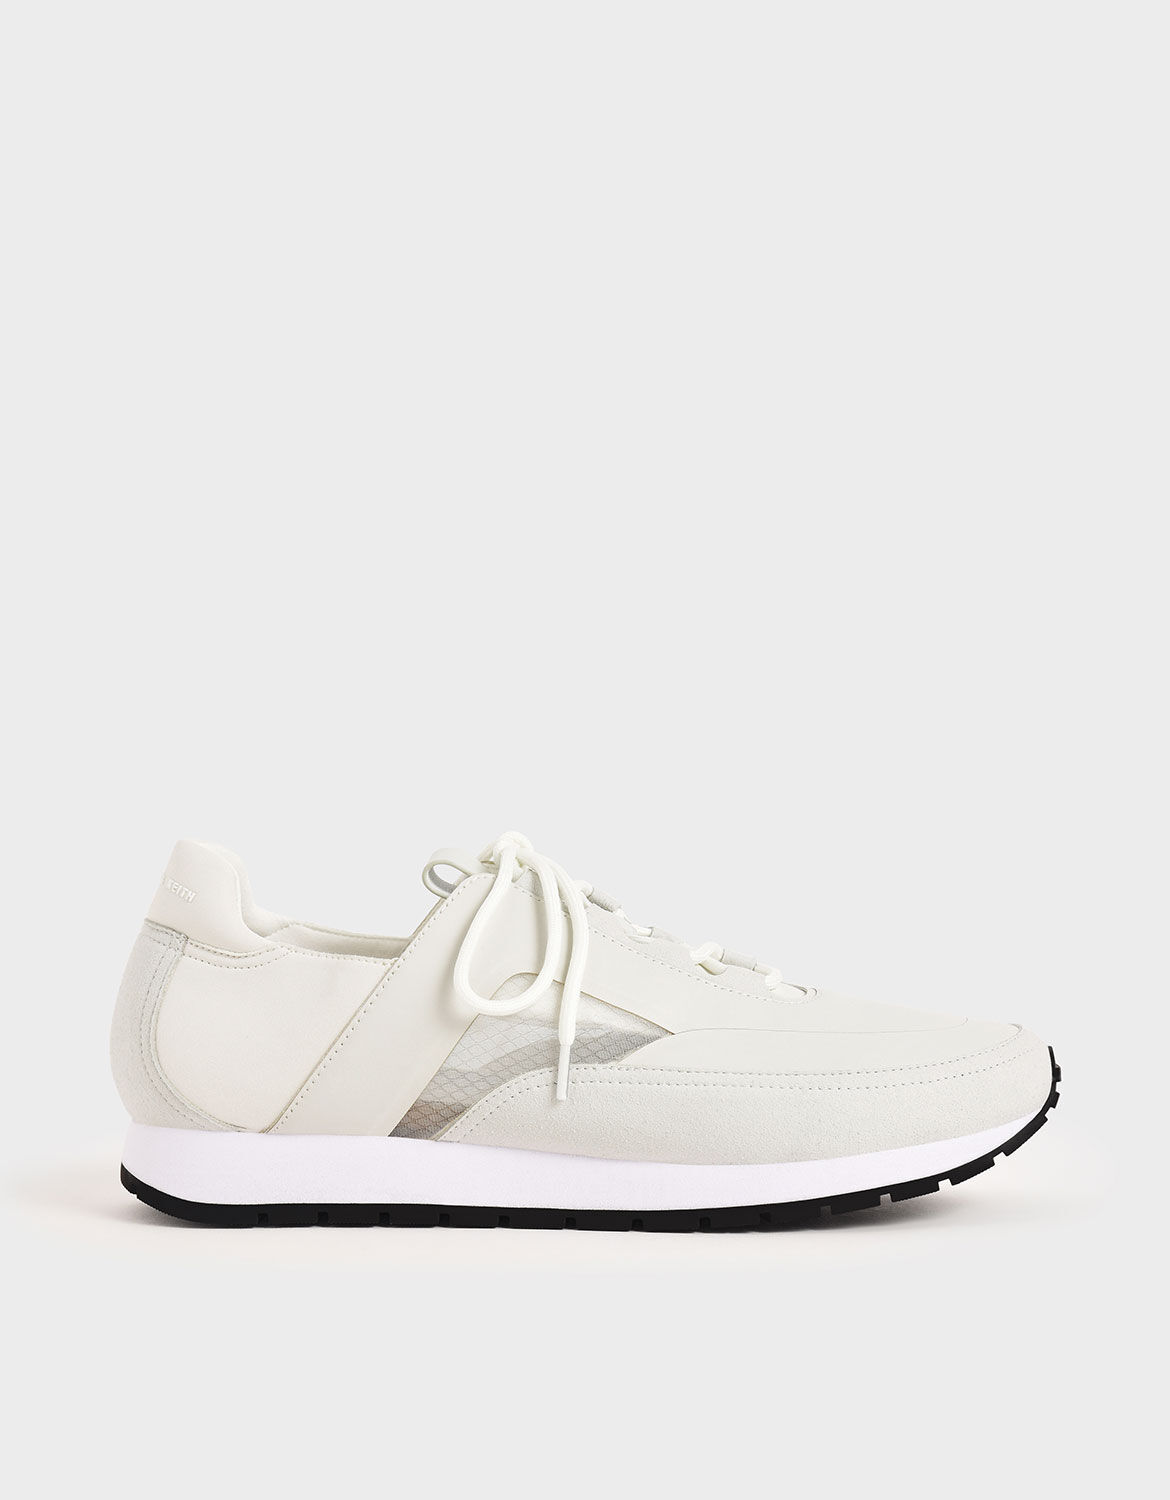 White Lace-Up Trainers | CHARLES \u0026 KEITH US